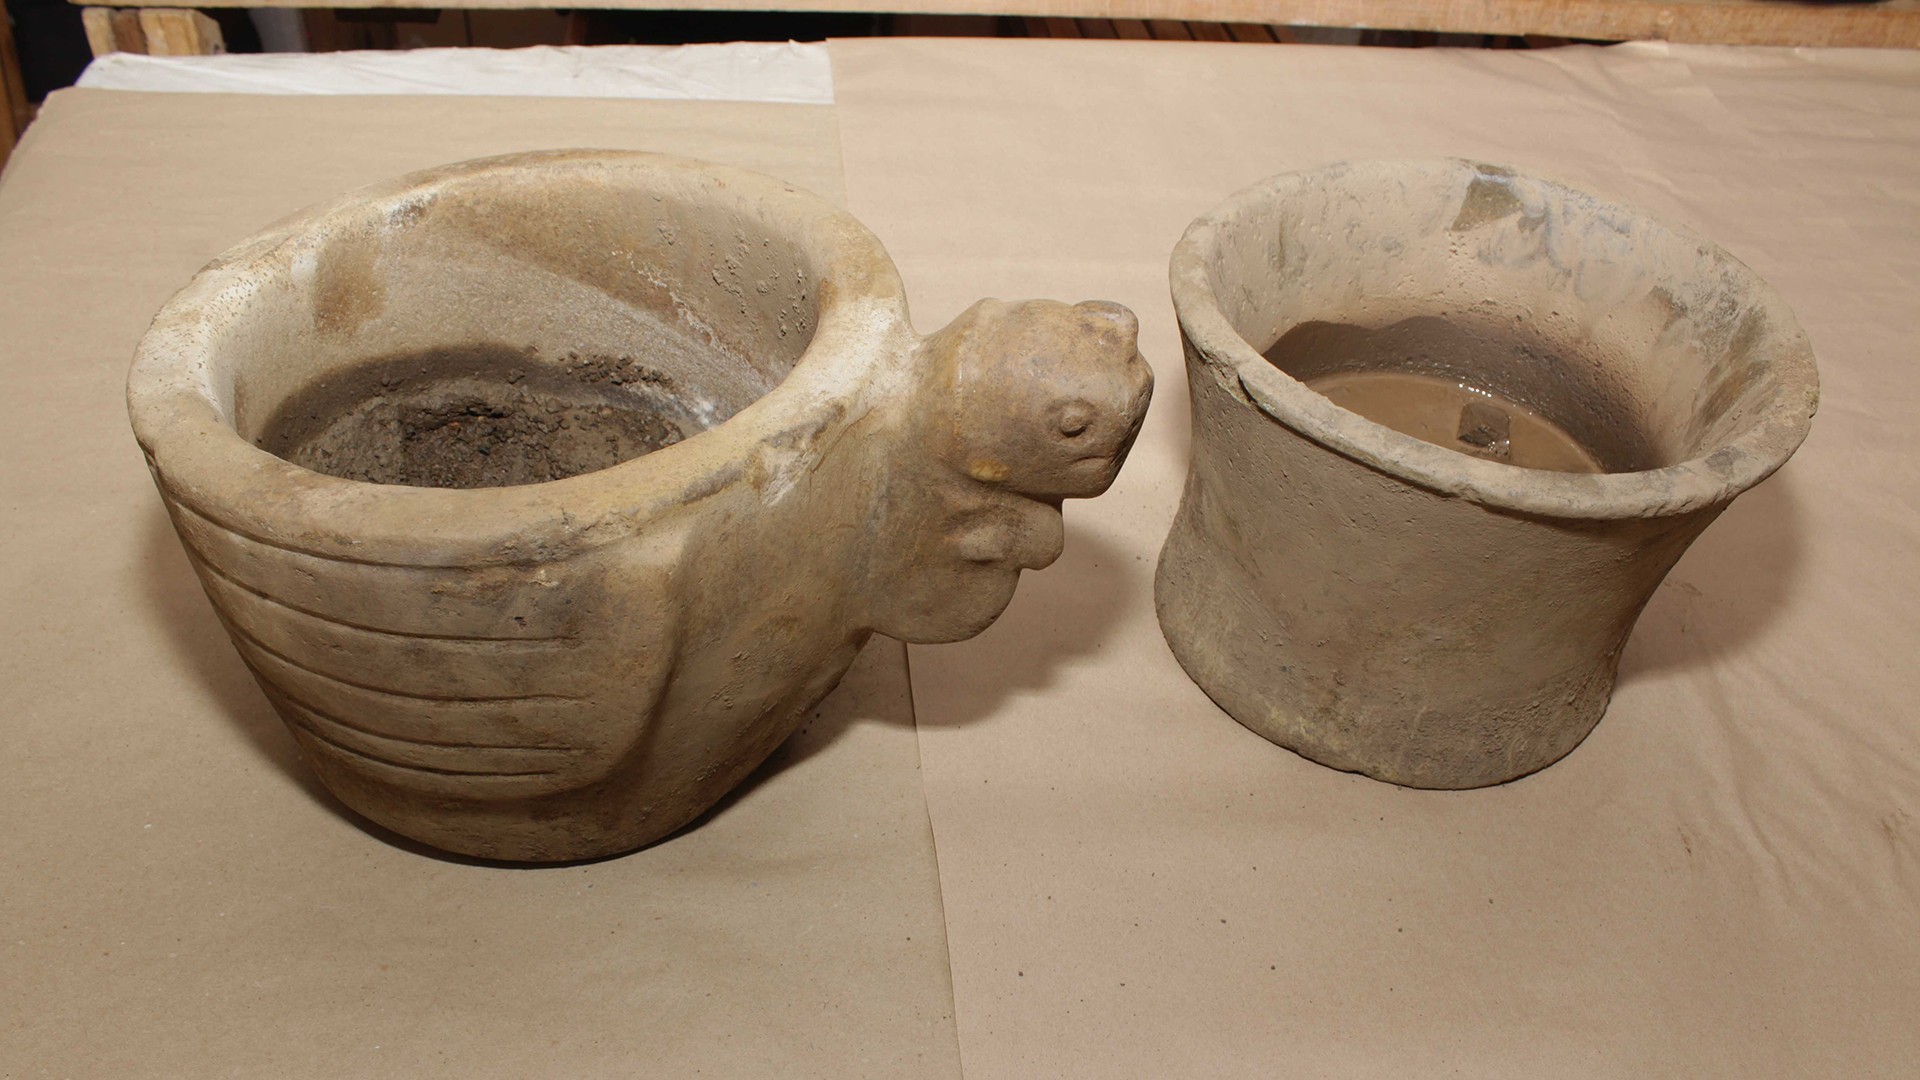 Two stone bowls adorned with Andean condor heads and wings were found in the gallery inside the hidden Chavín de Huántar temple complex.